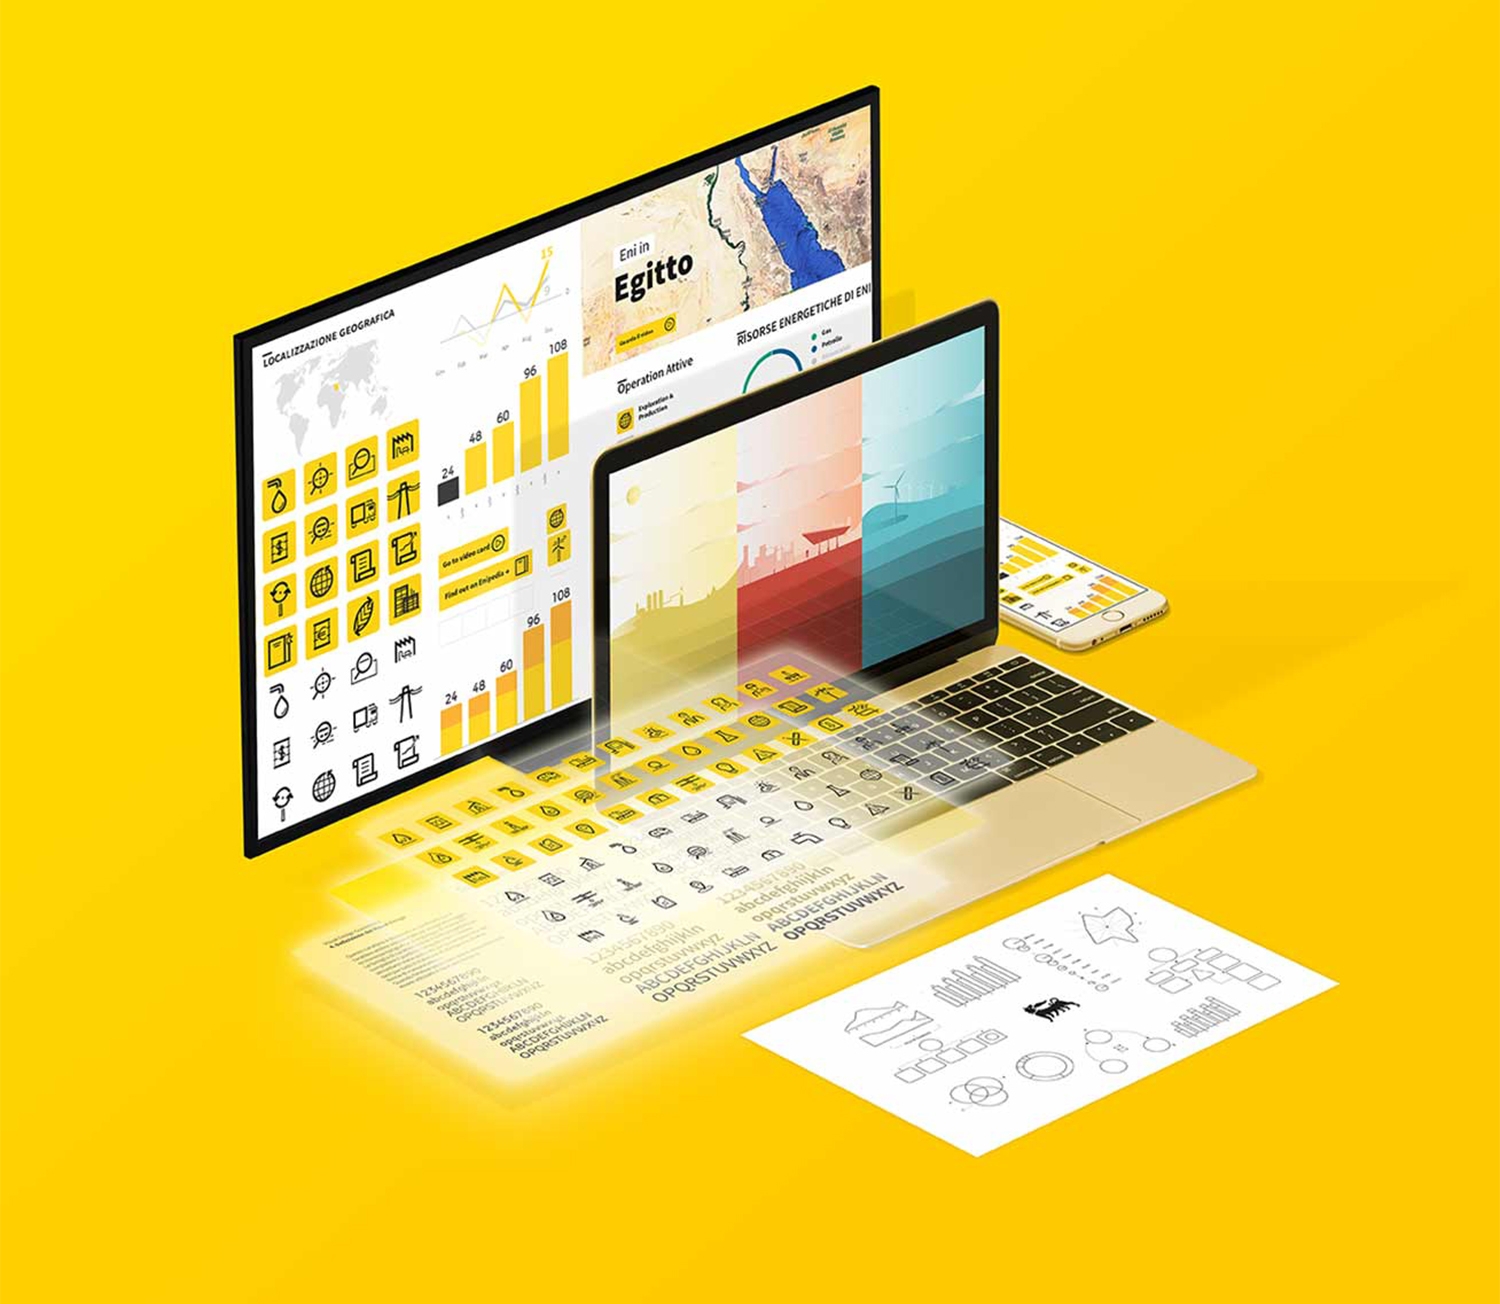 Information design and data-visualization for a communication strategy